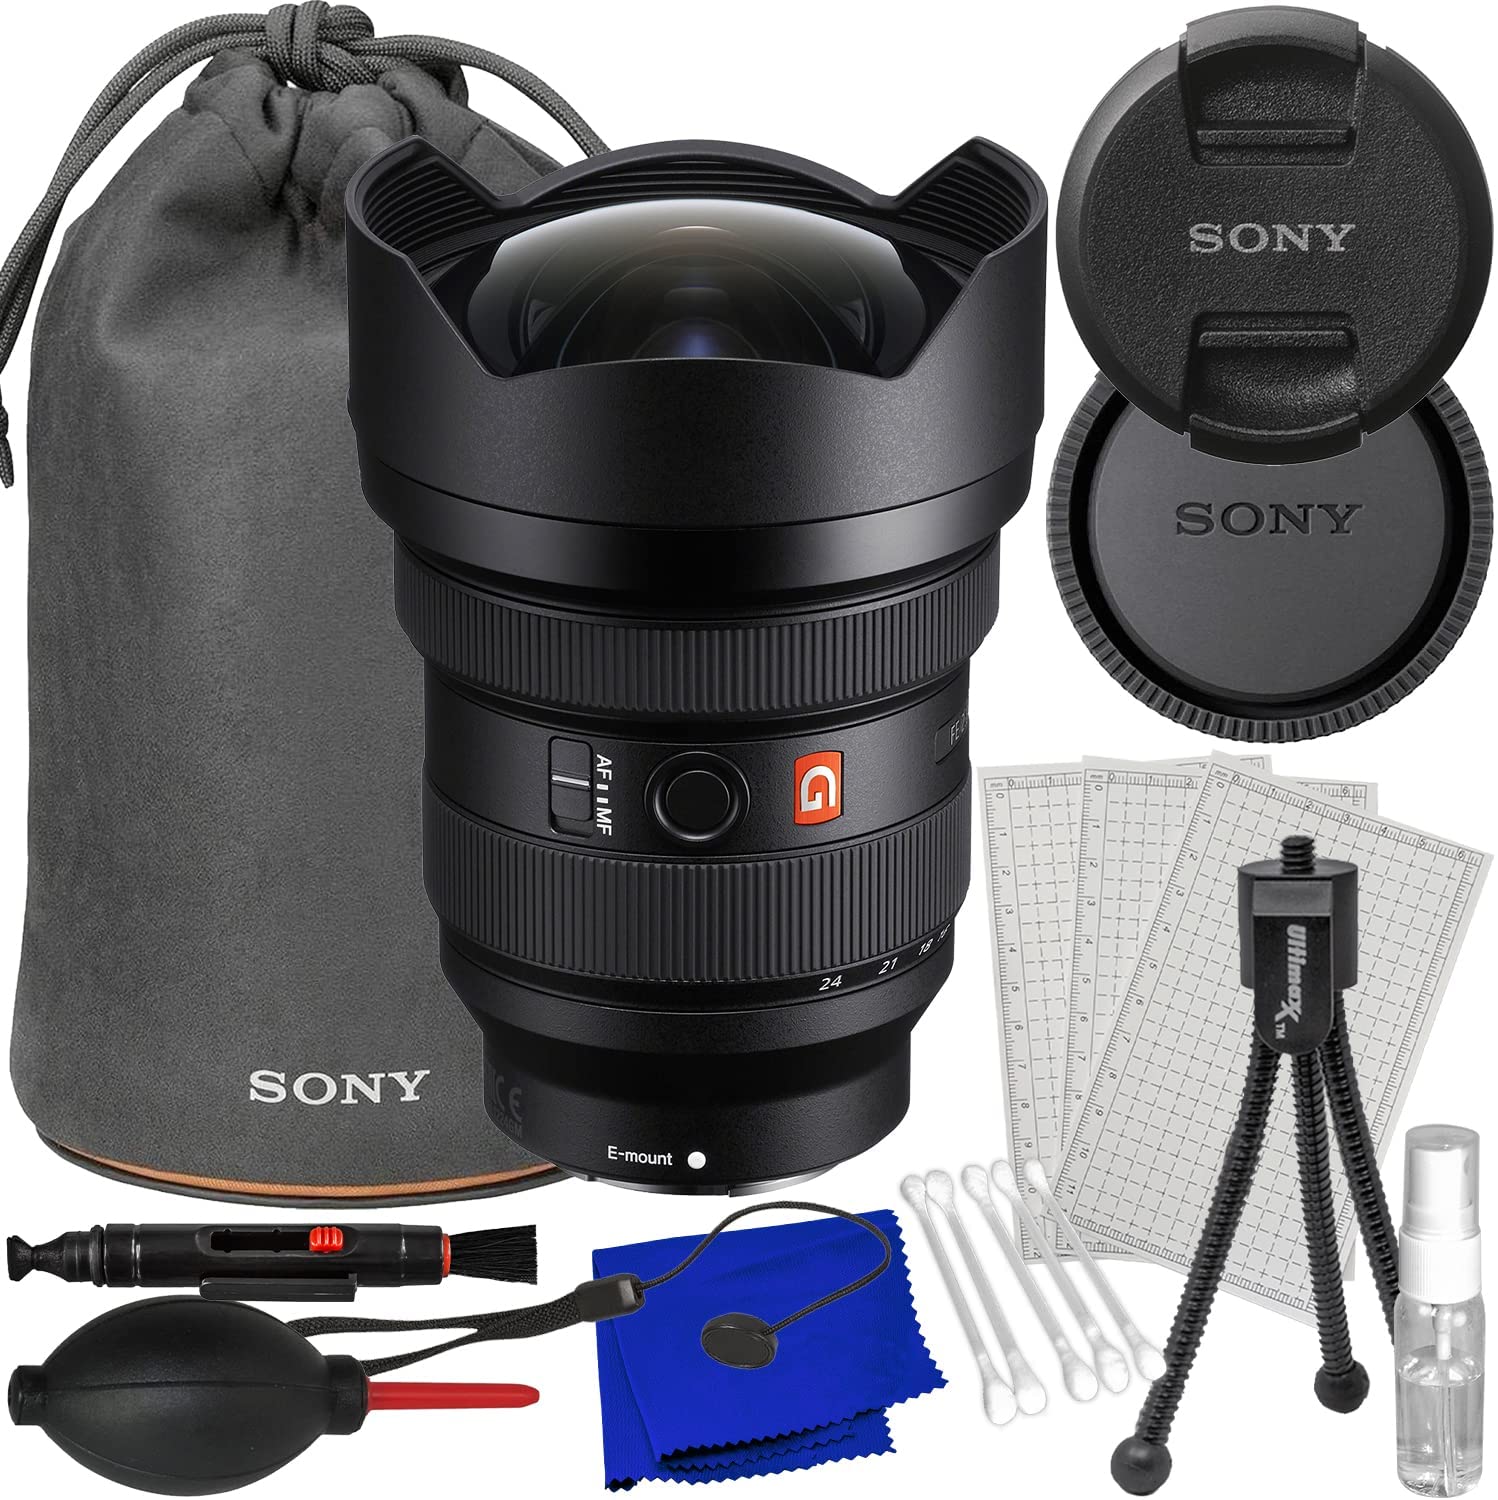 Sony FE 12-24mm f/2.8 GM Lens + Filter Cutting Template, Front & Rear Lens Cap, Lens Case, Universal Lens Cap Keeper, Dual - Ended Gadget Cleaning Pen, Starter 5PC Maintenance Kit & More (13pc Bundle)